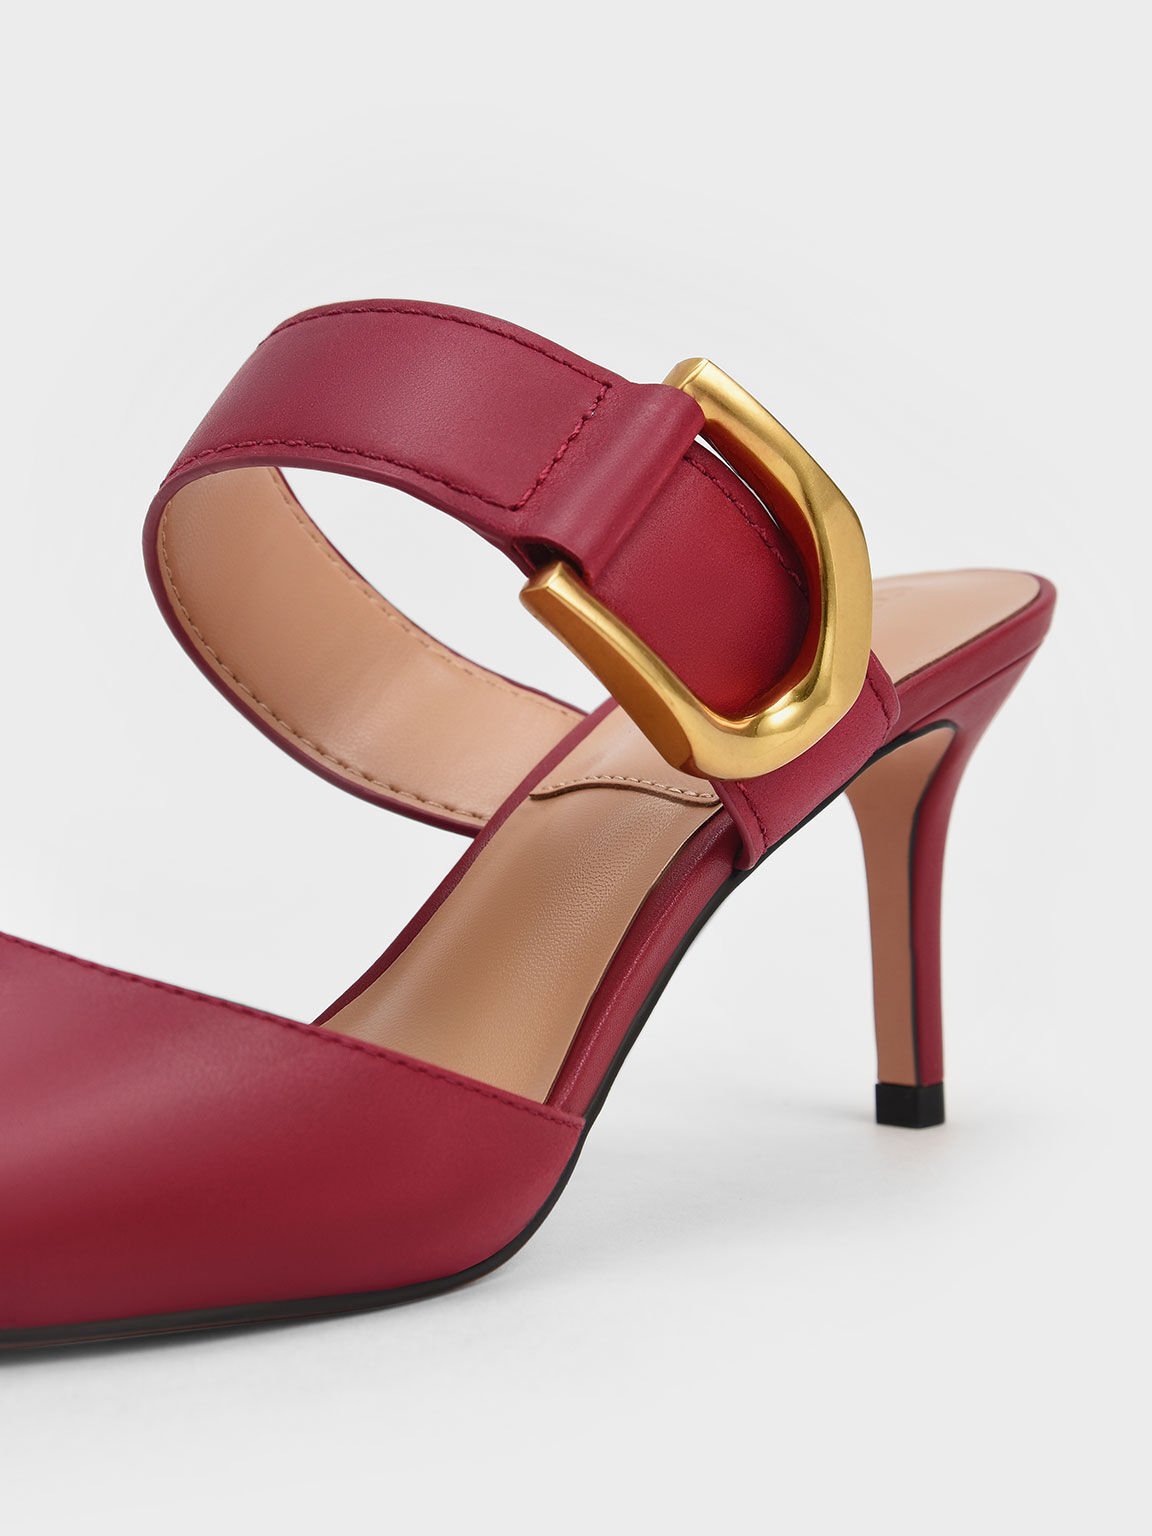 Lunar New Year Collection: Gabine Buckled Leather Mule Pumps, Red, hi-res